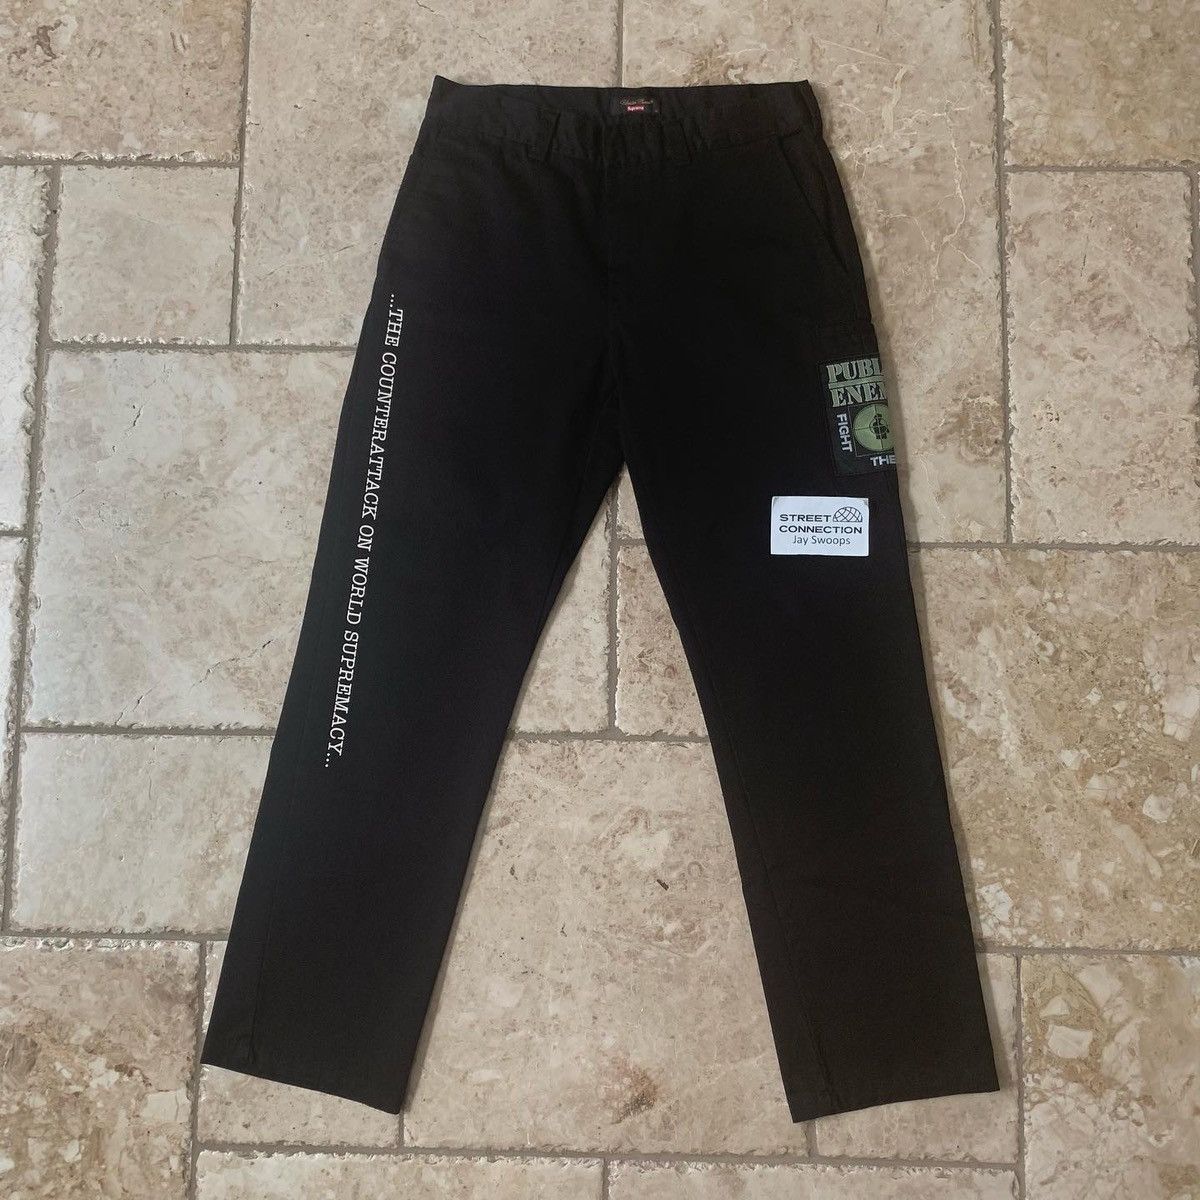 Supreme Undercover x Supreme 16AW Anarchy Zipper Work Pants | Grailed